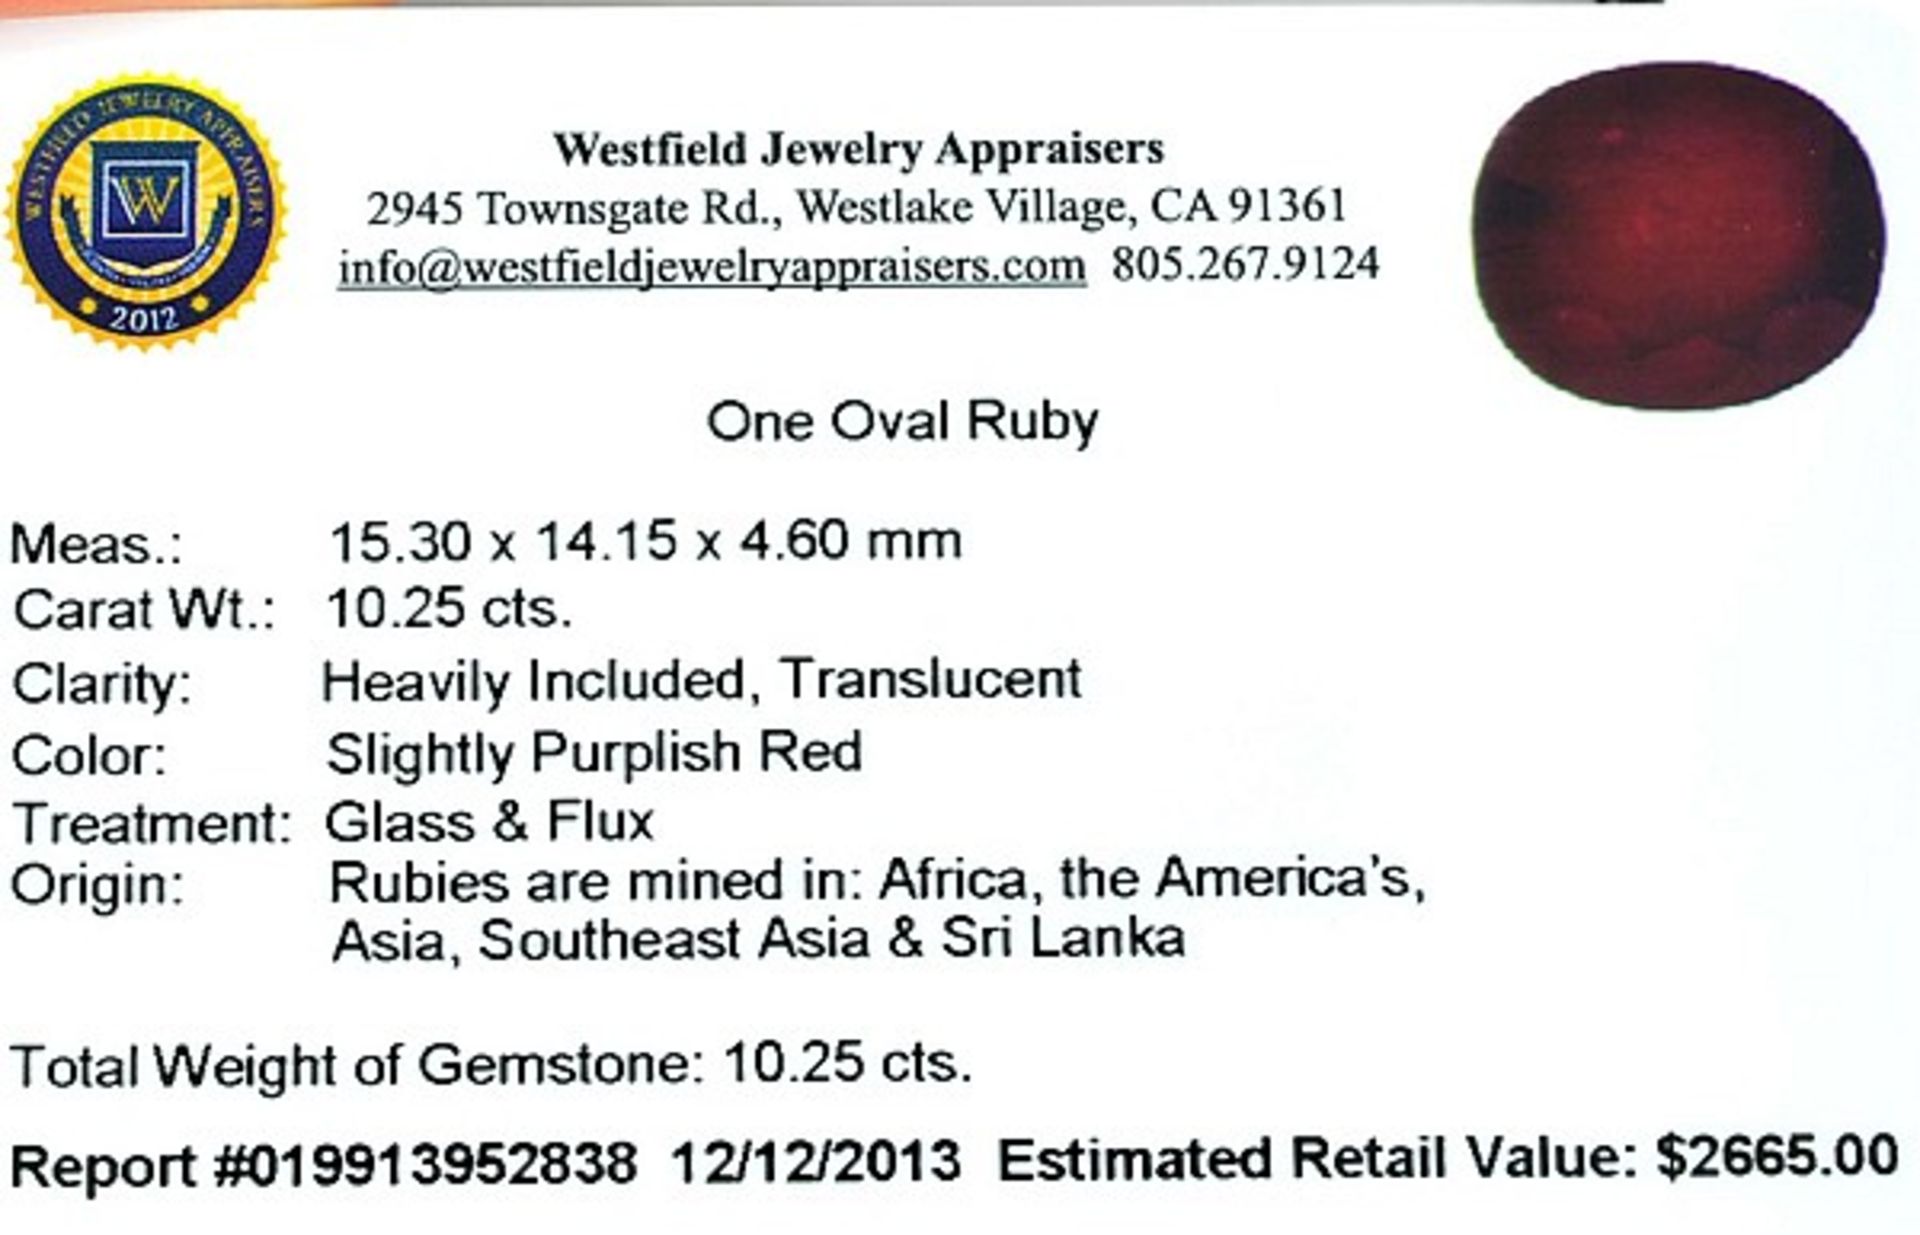 A Beautifully Shaped Oval Cut Ruby Gemstone = 10.25 carat, measures 15.30 x 14.15 x 4.60mm - Image 2 of 2